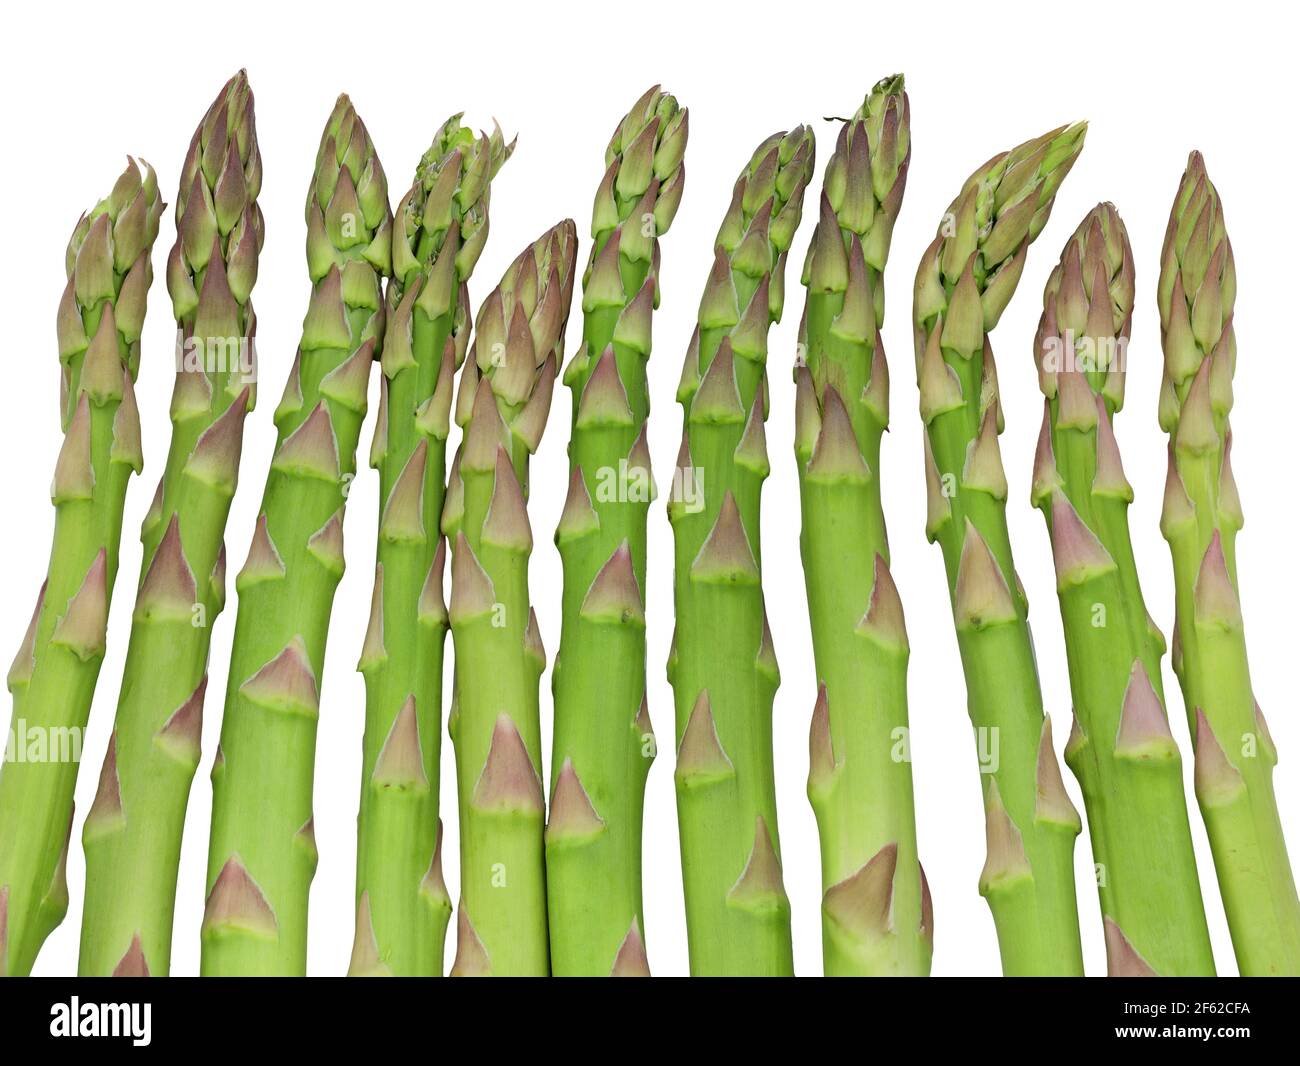 fresh green asparagus vertically next to each other isolated on white background, close up of asparagus spikes Stock Photo